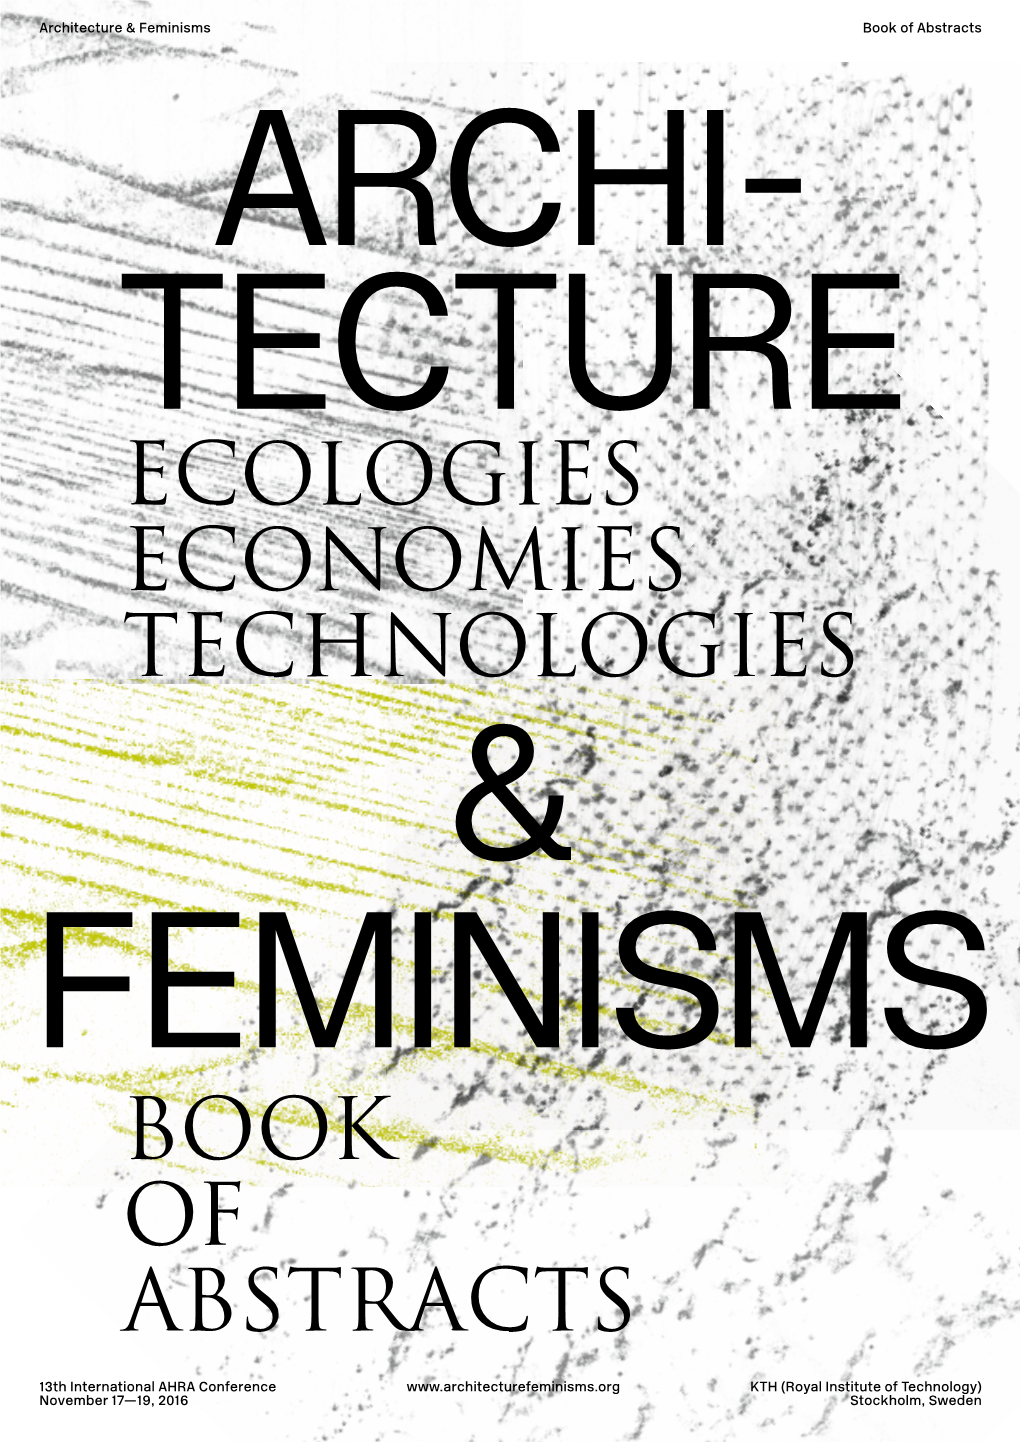 Ecologies Economies Technologies Book of Abstracts